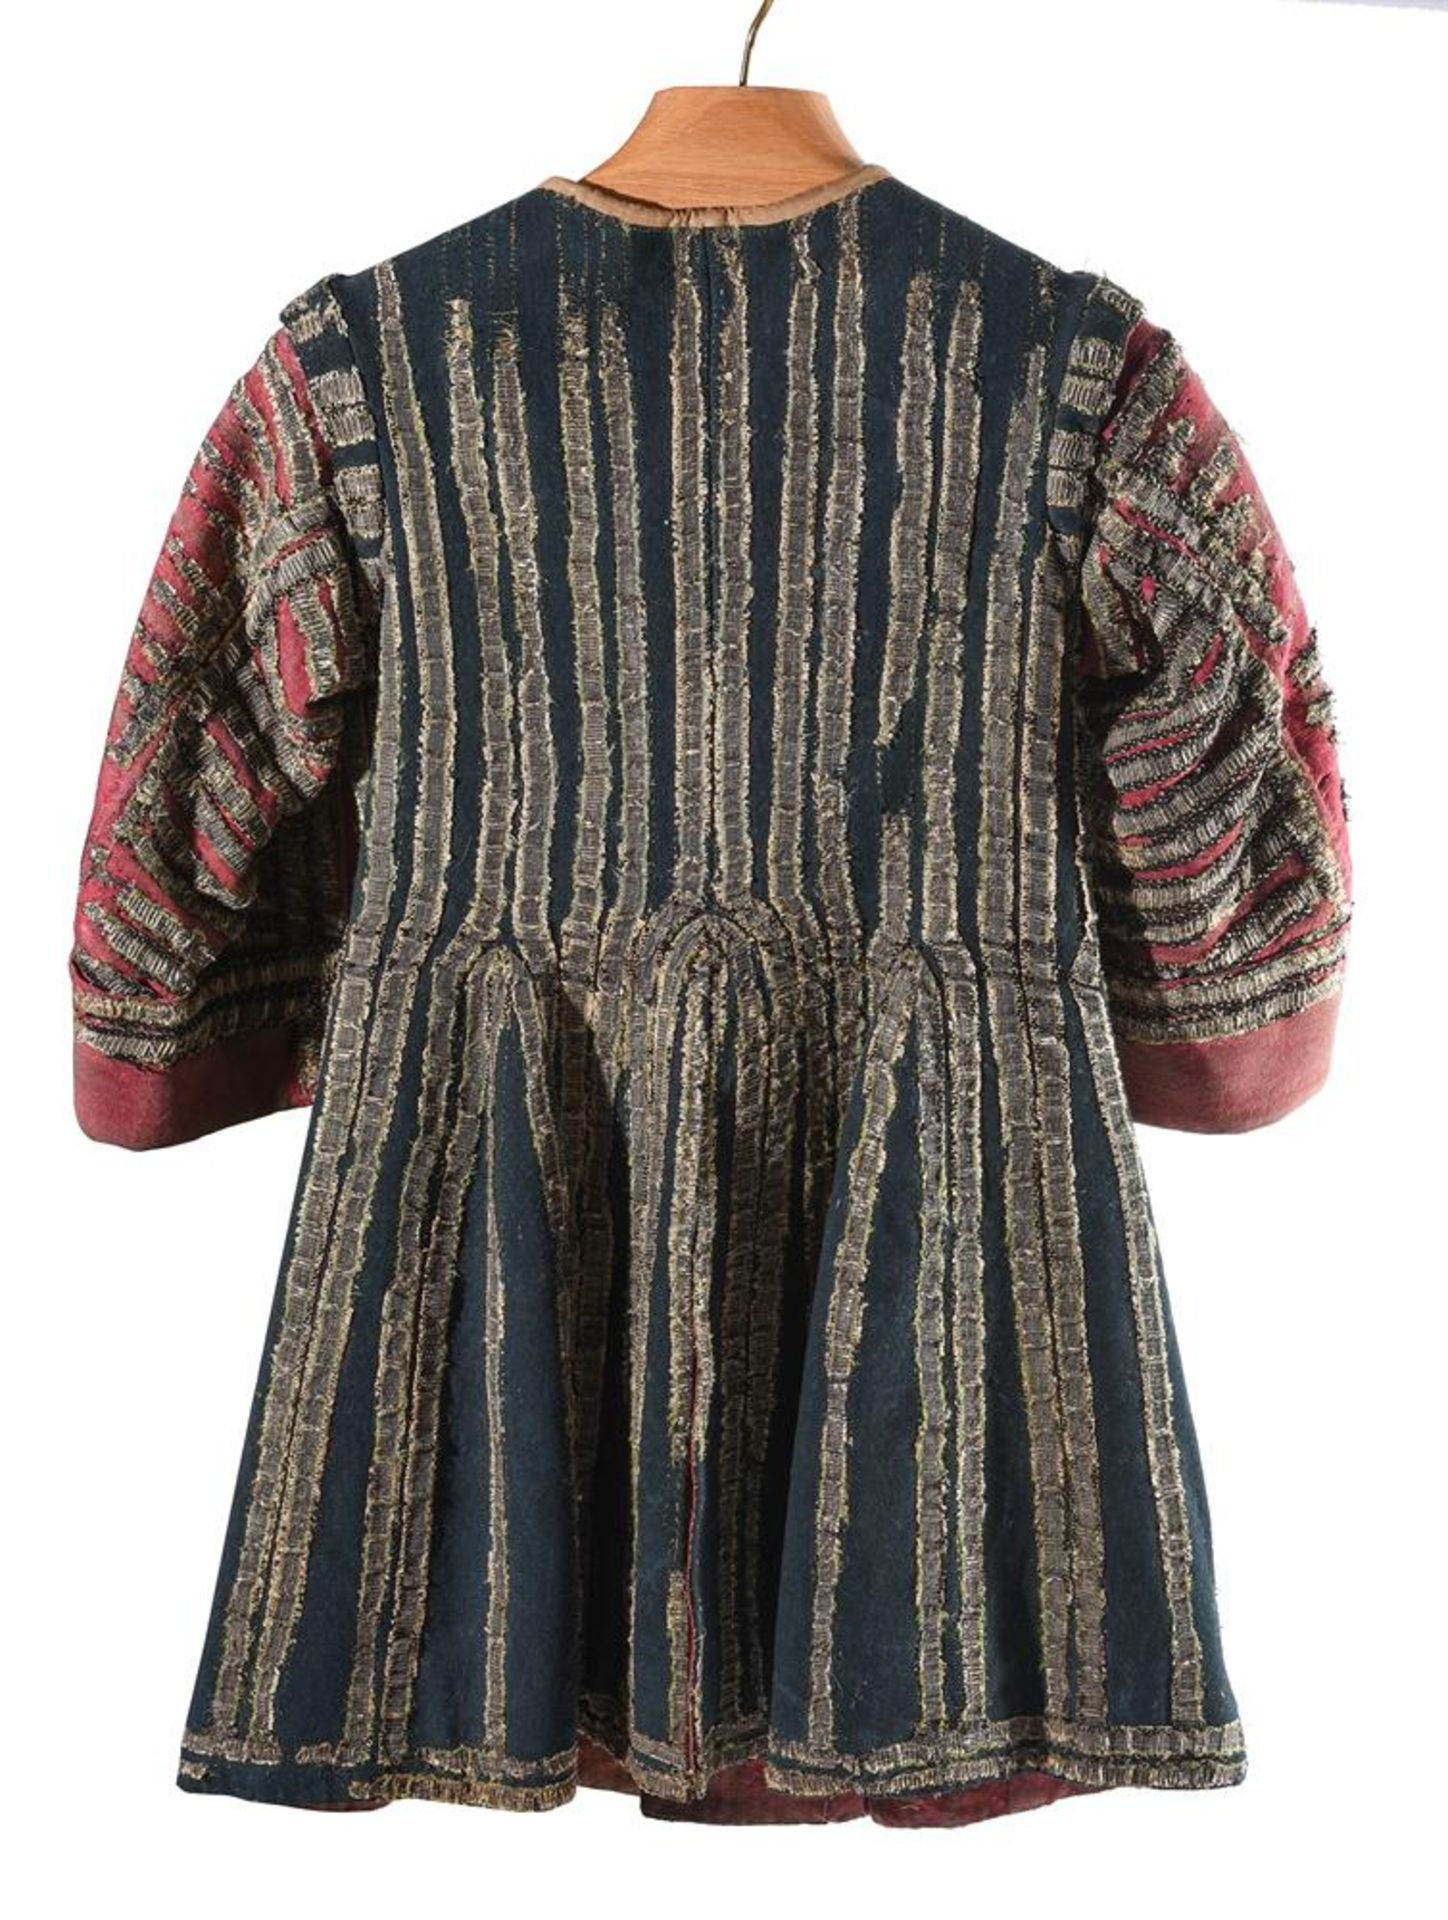 AN EMBROIDERED VELVET TUNIC OF A SHERWOOD FORESTER, 17TH CENTURY - Bild 3 aus 3